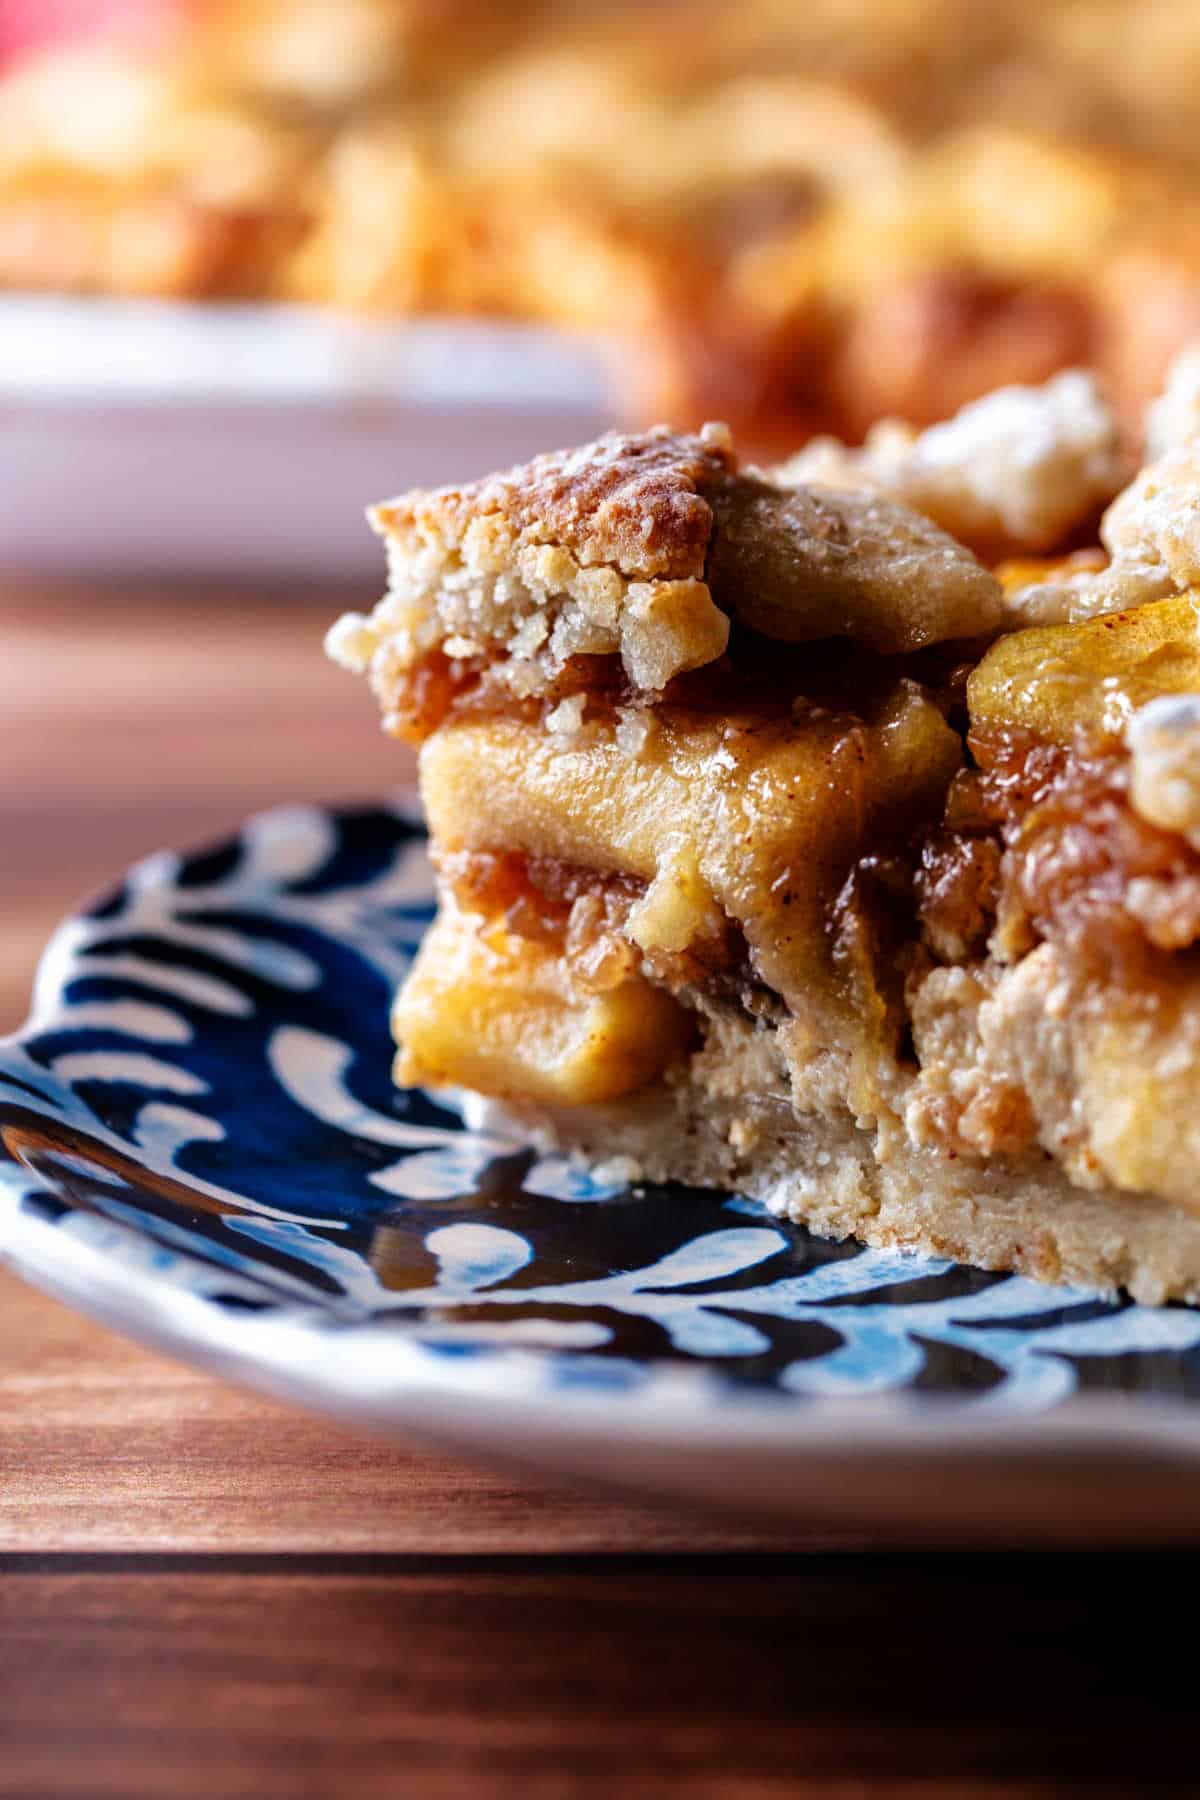 A close-up shot of a slice of apple custard pie showing the cookie crust, custard layer, and the brown-sugar apples.